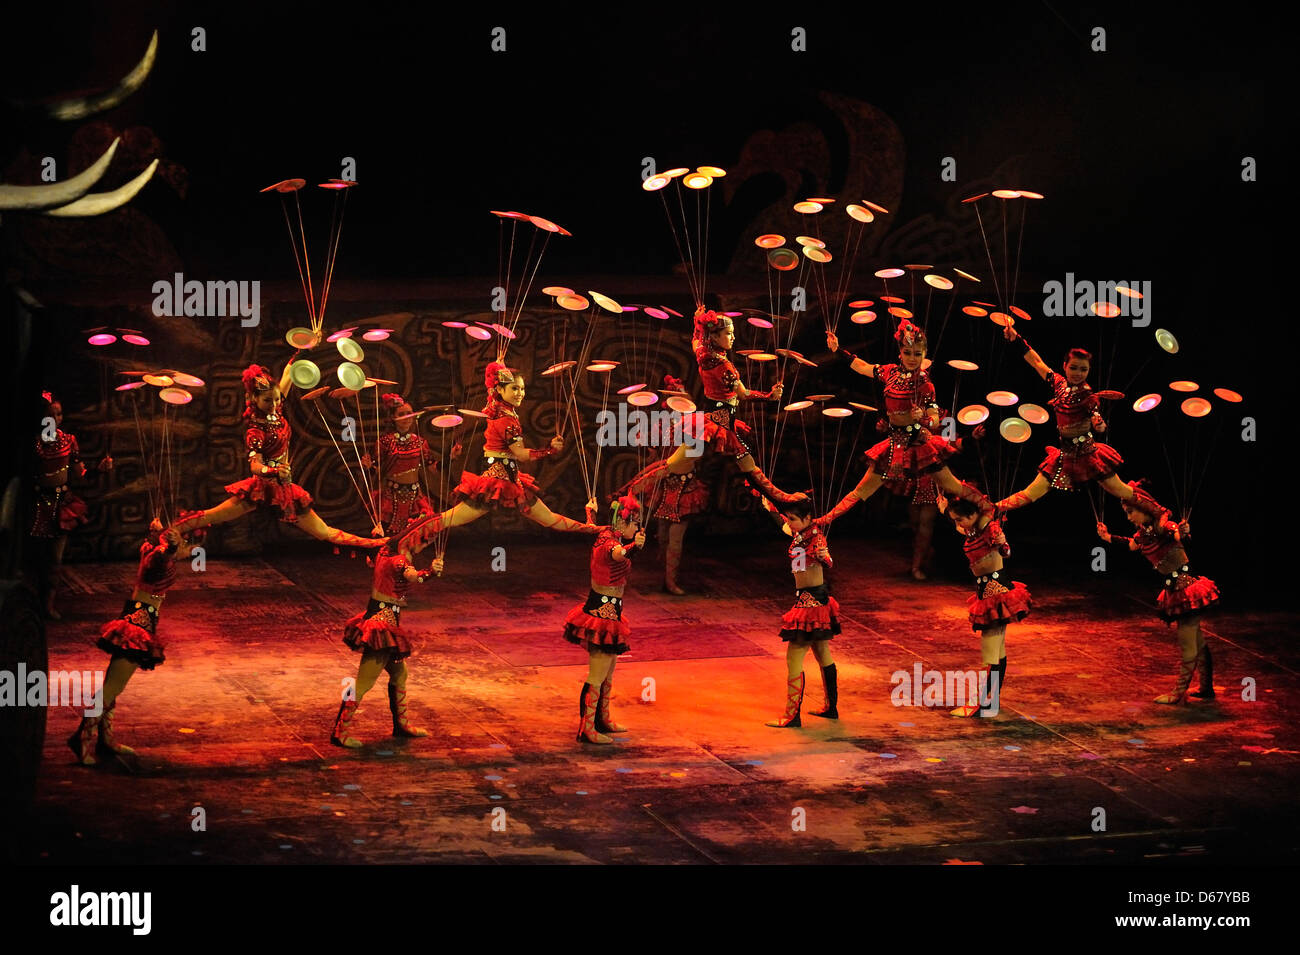 Beijing, China - April 1:A group of acrobat dancers perform during acrobatic show at Chaoyang Theater, Beijing on April 1, 2013. Stock Photo